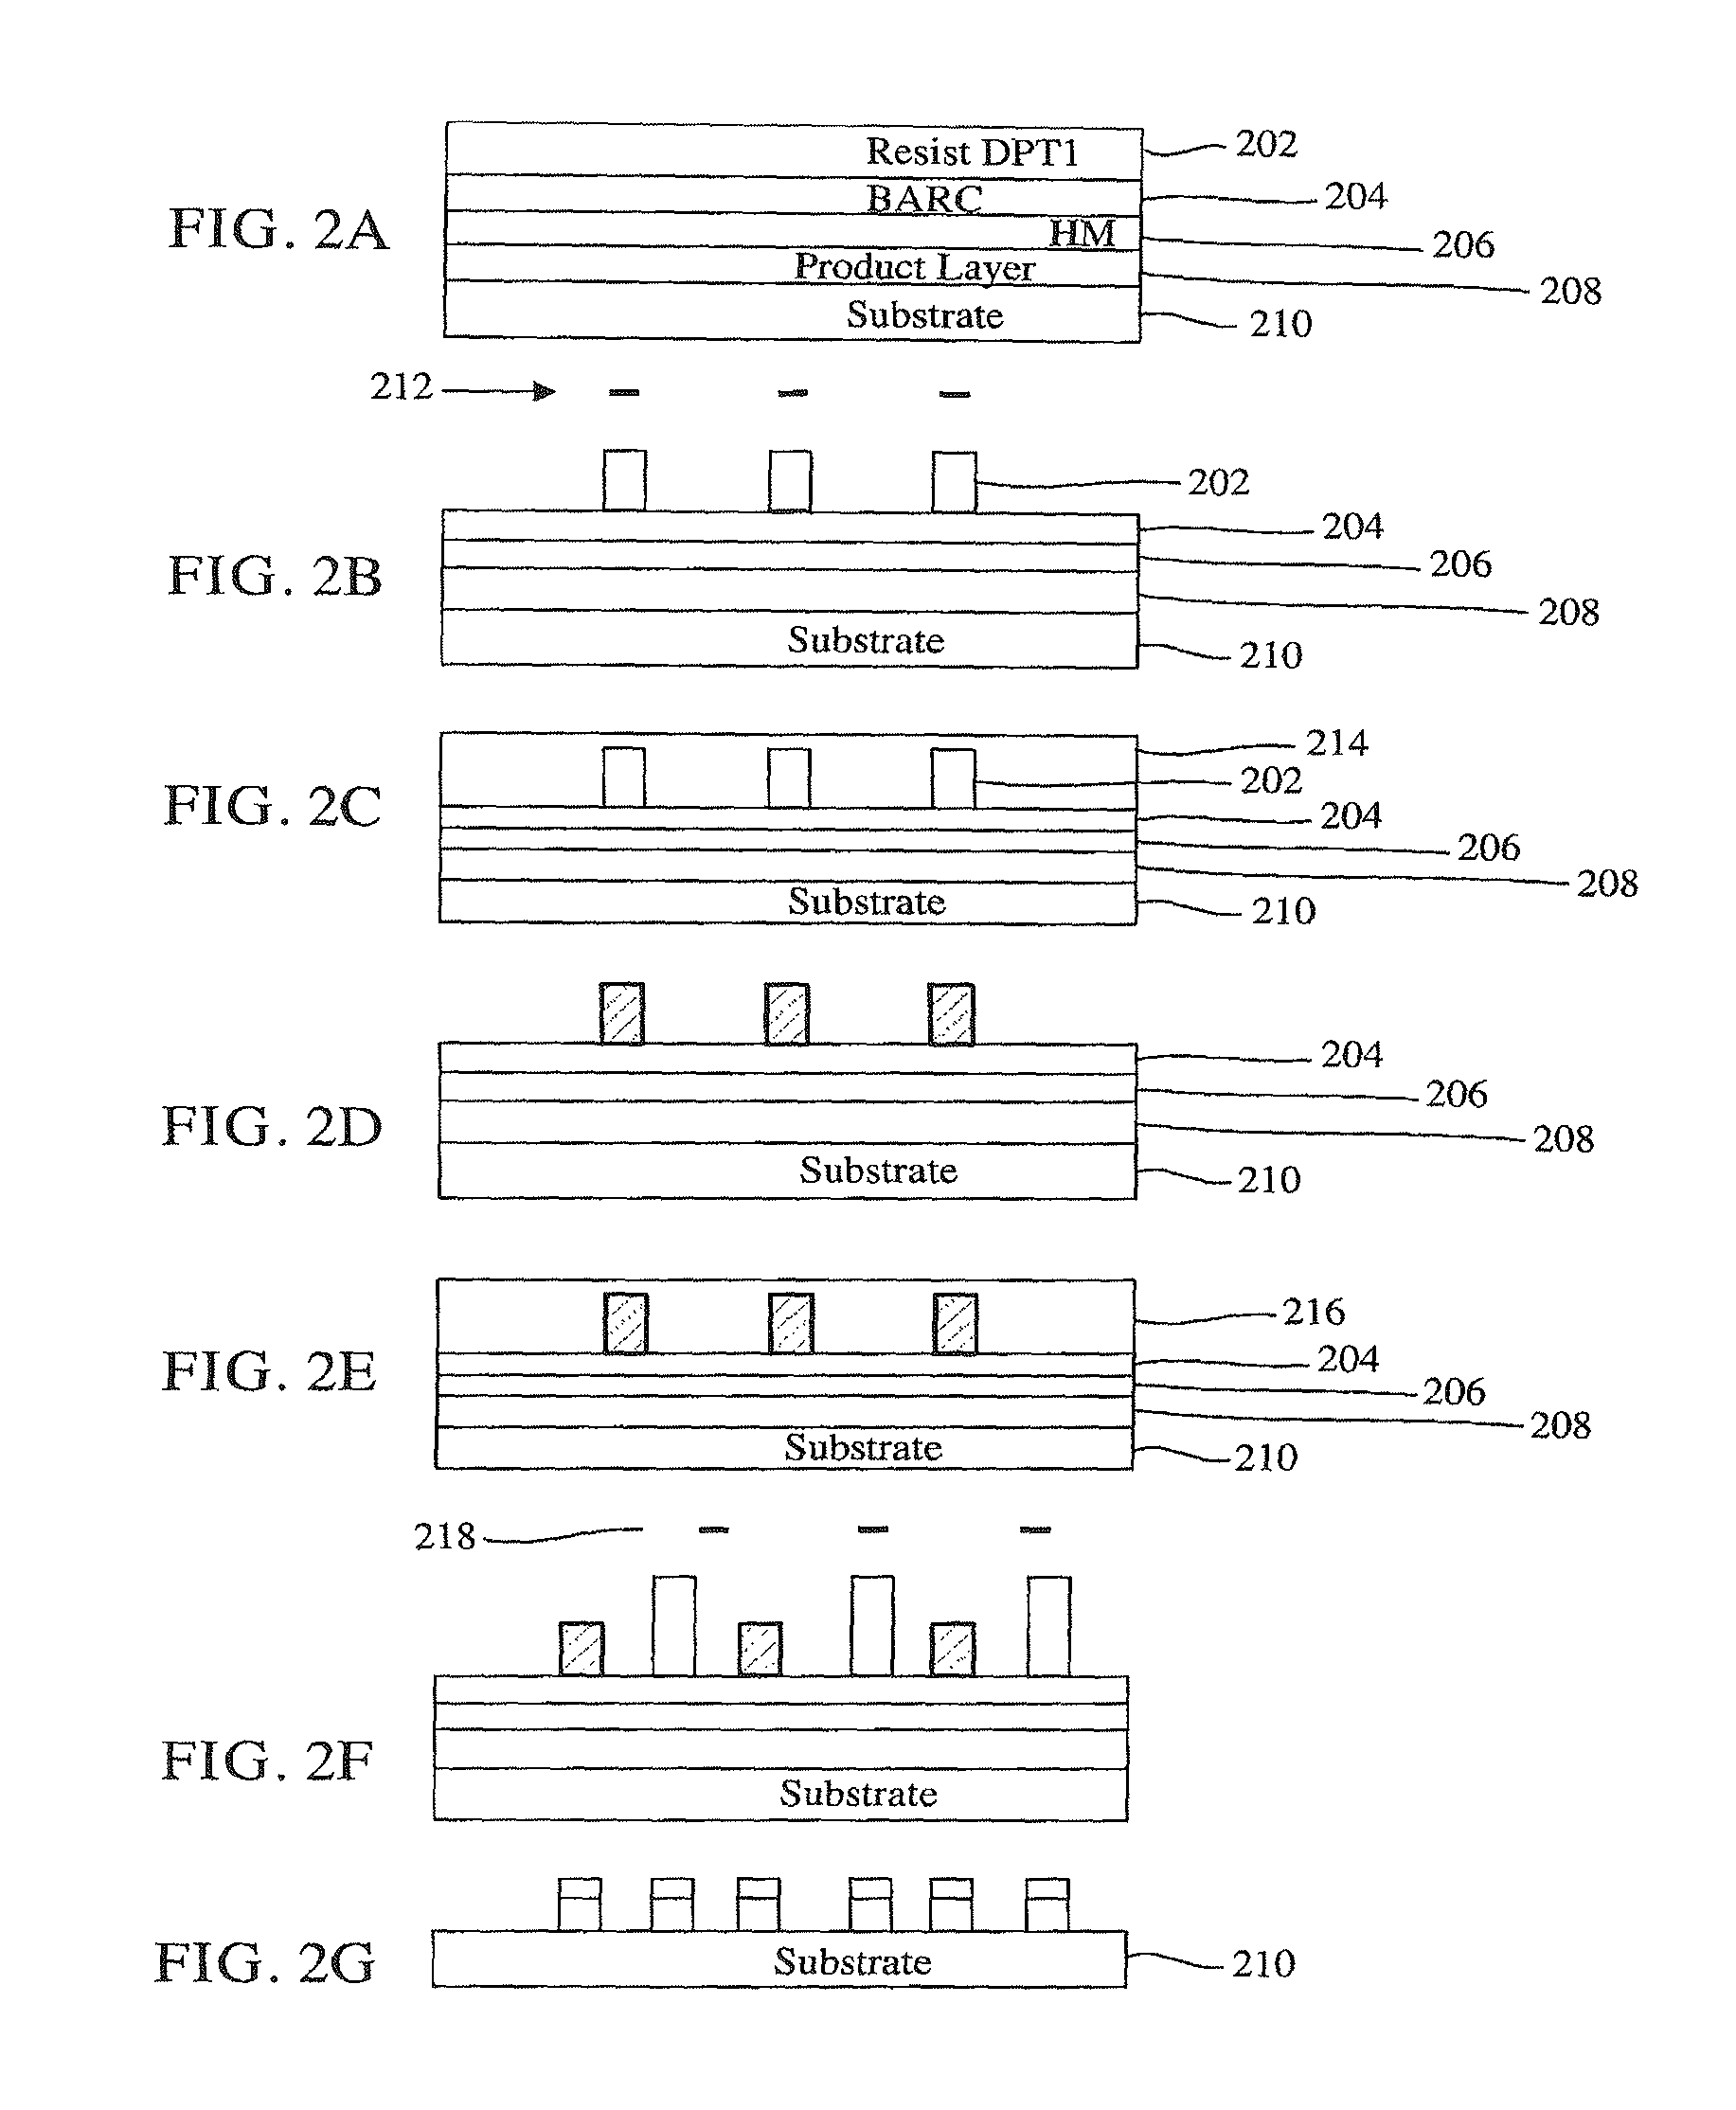 Apparatus and method for providing resist alignment marks in a double patterning lithographic process